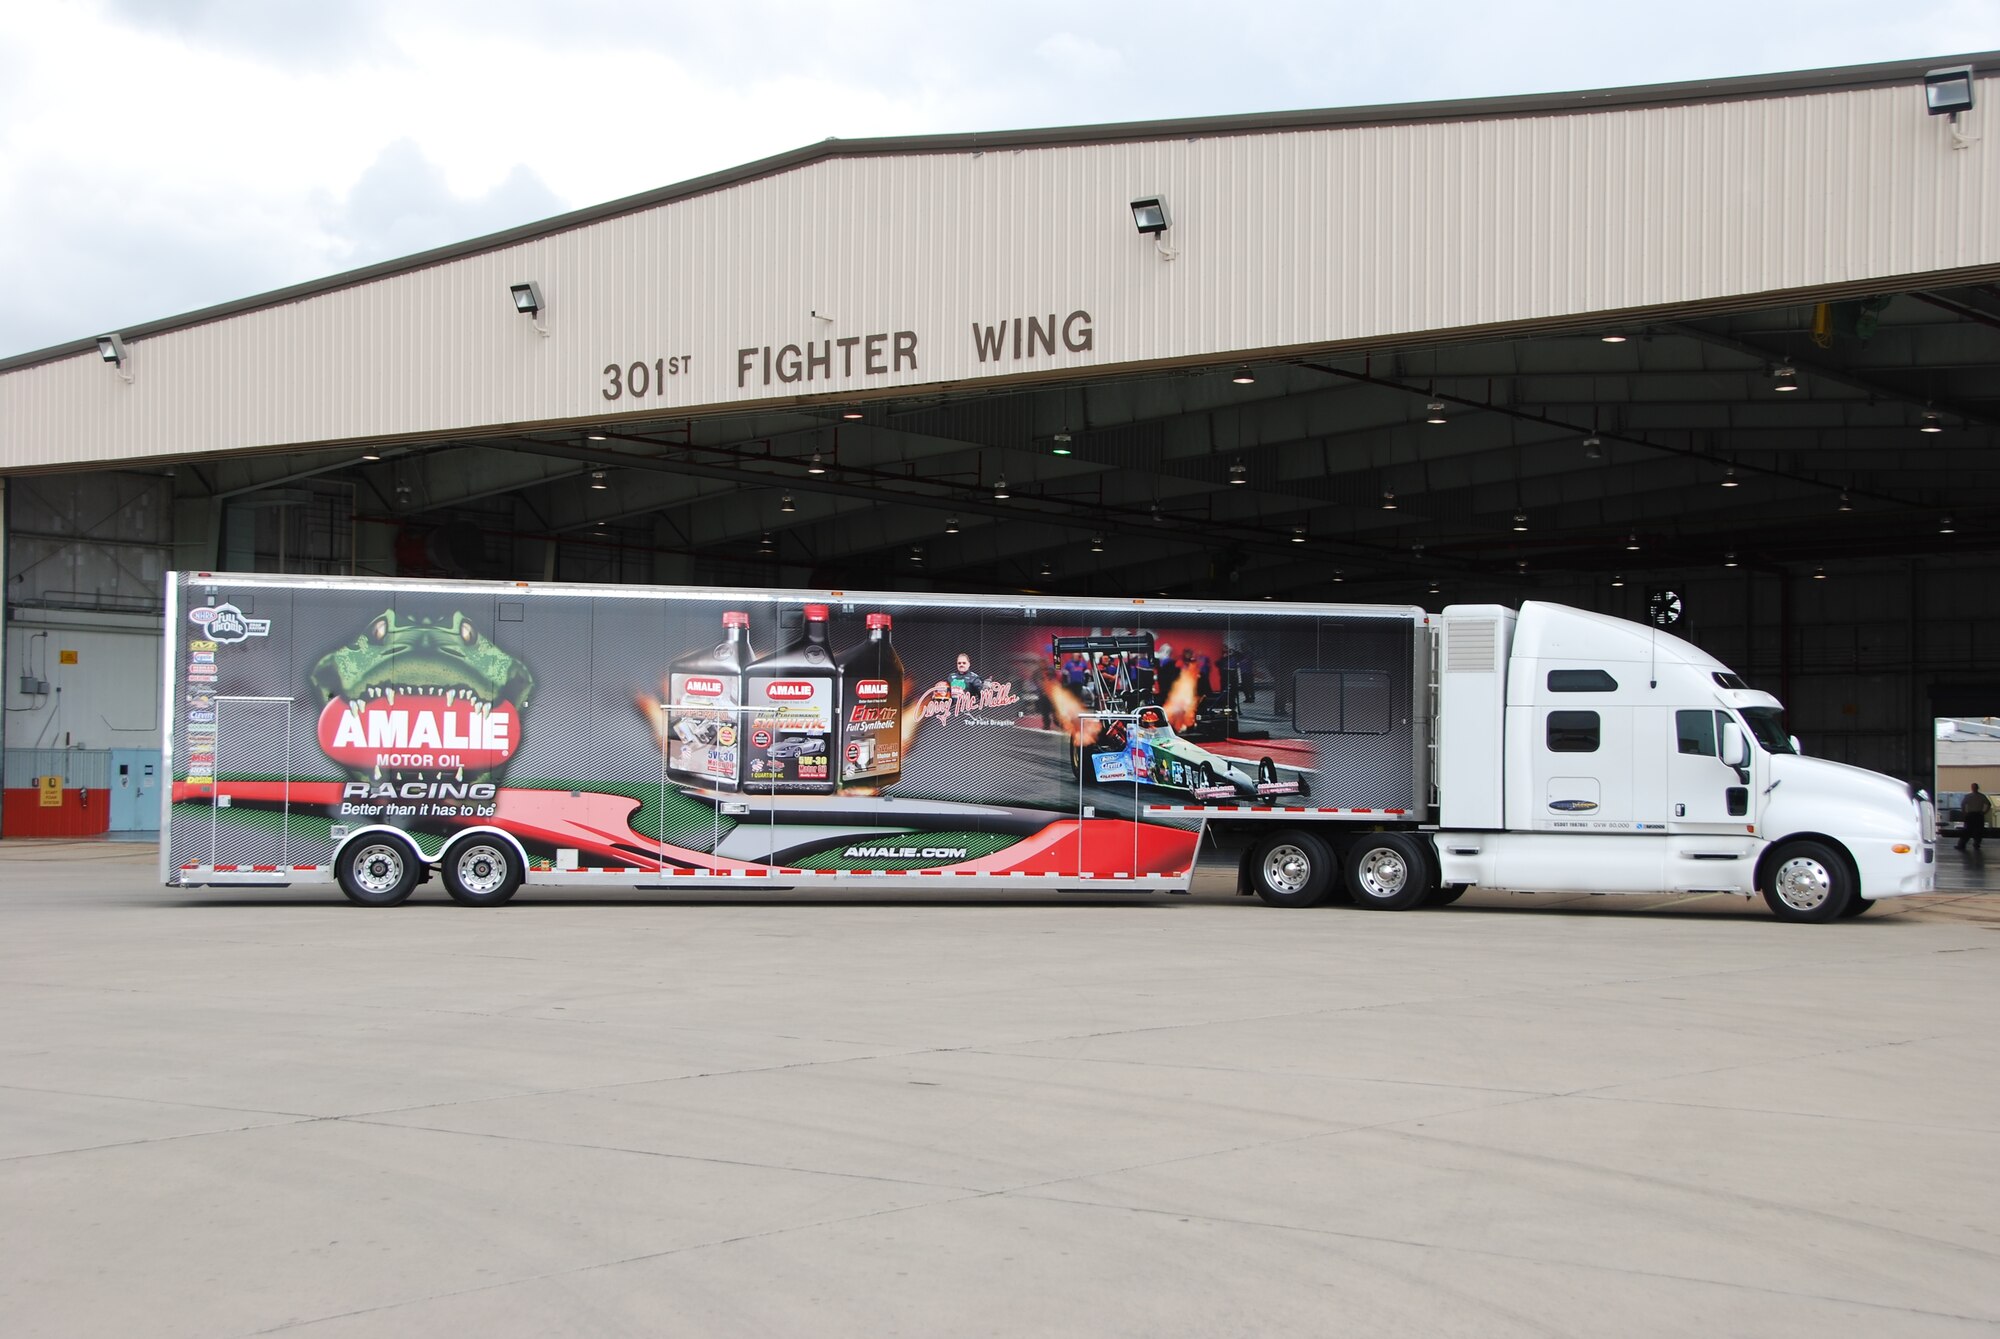 Semi belonging to Mr. Terry McMillen, driver of the Amalie Oil Top Fuel dragster, pulls up in front the of 301st Fighter Wing hangar as the crew prepares to assemble the dragster for the next morning’s demonstration. McMillen and his crew recently visited the 301st Fighter Wing before racing at a Dallas-area event. (Air Force Photo/Tech. Sgt. Shawn McCowan)